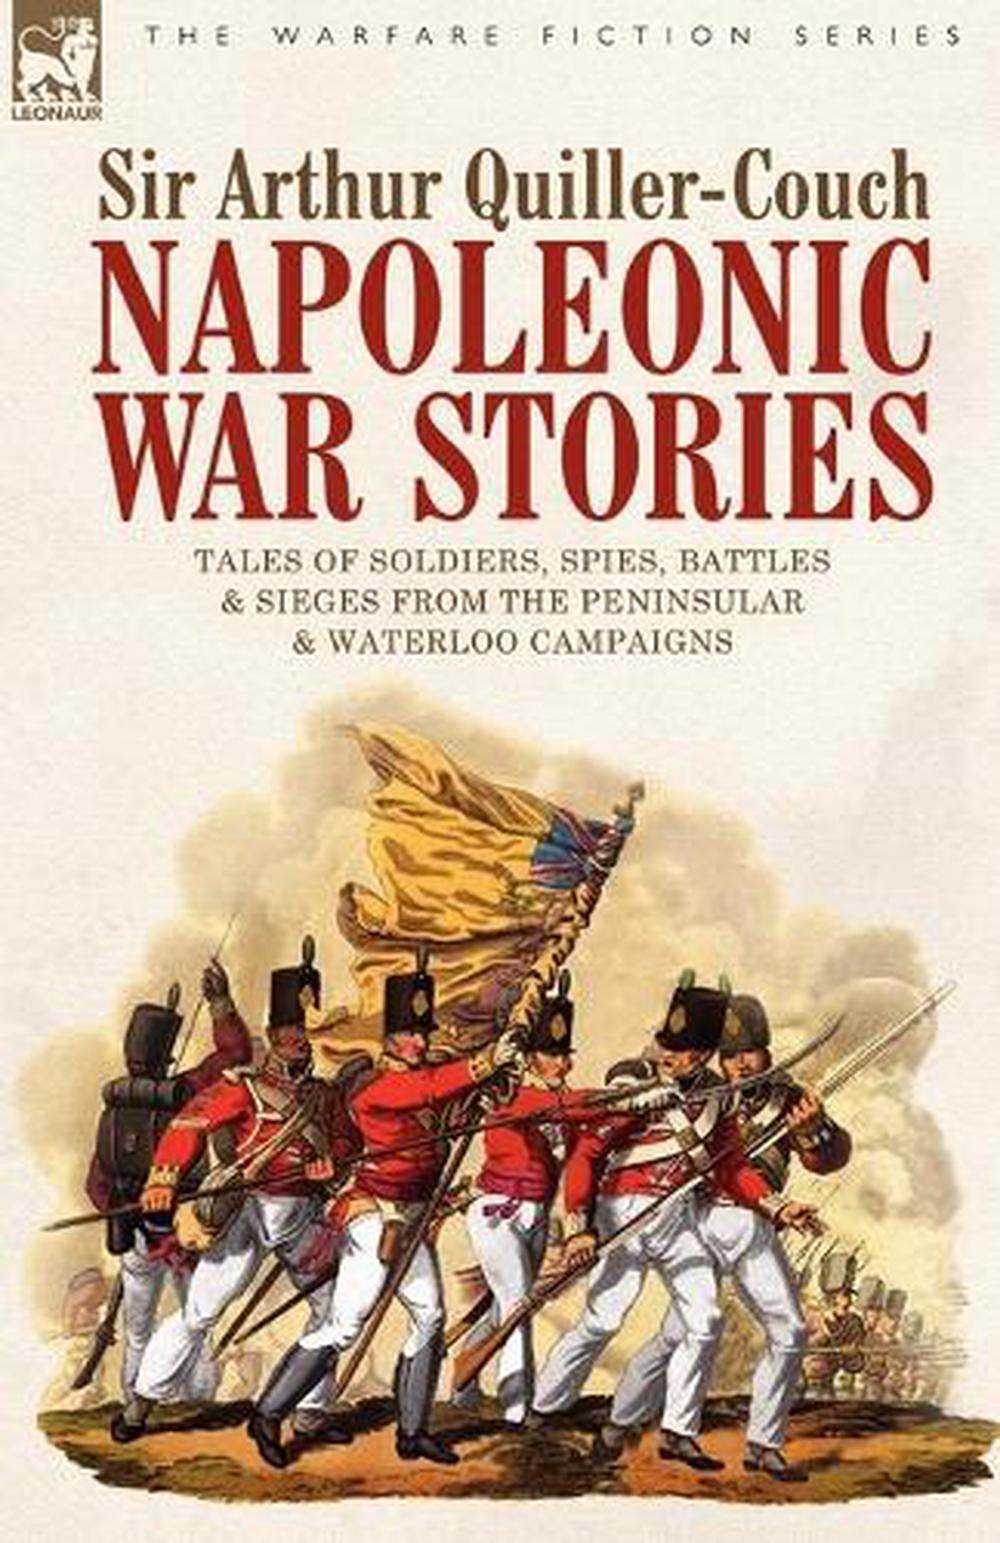 Napoleonic War Stories - Tales of Soldiers, Spies, Battles & Sieges ...